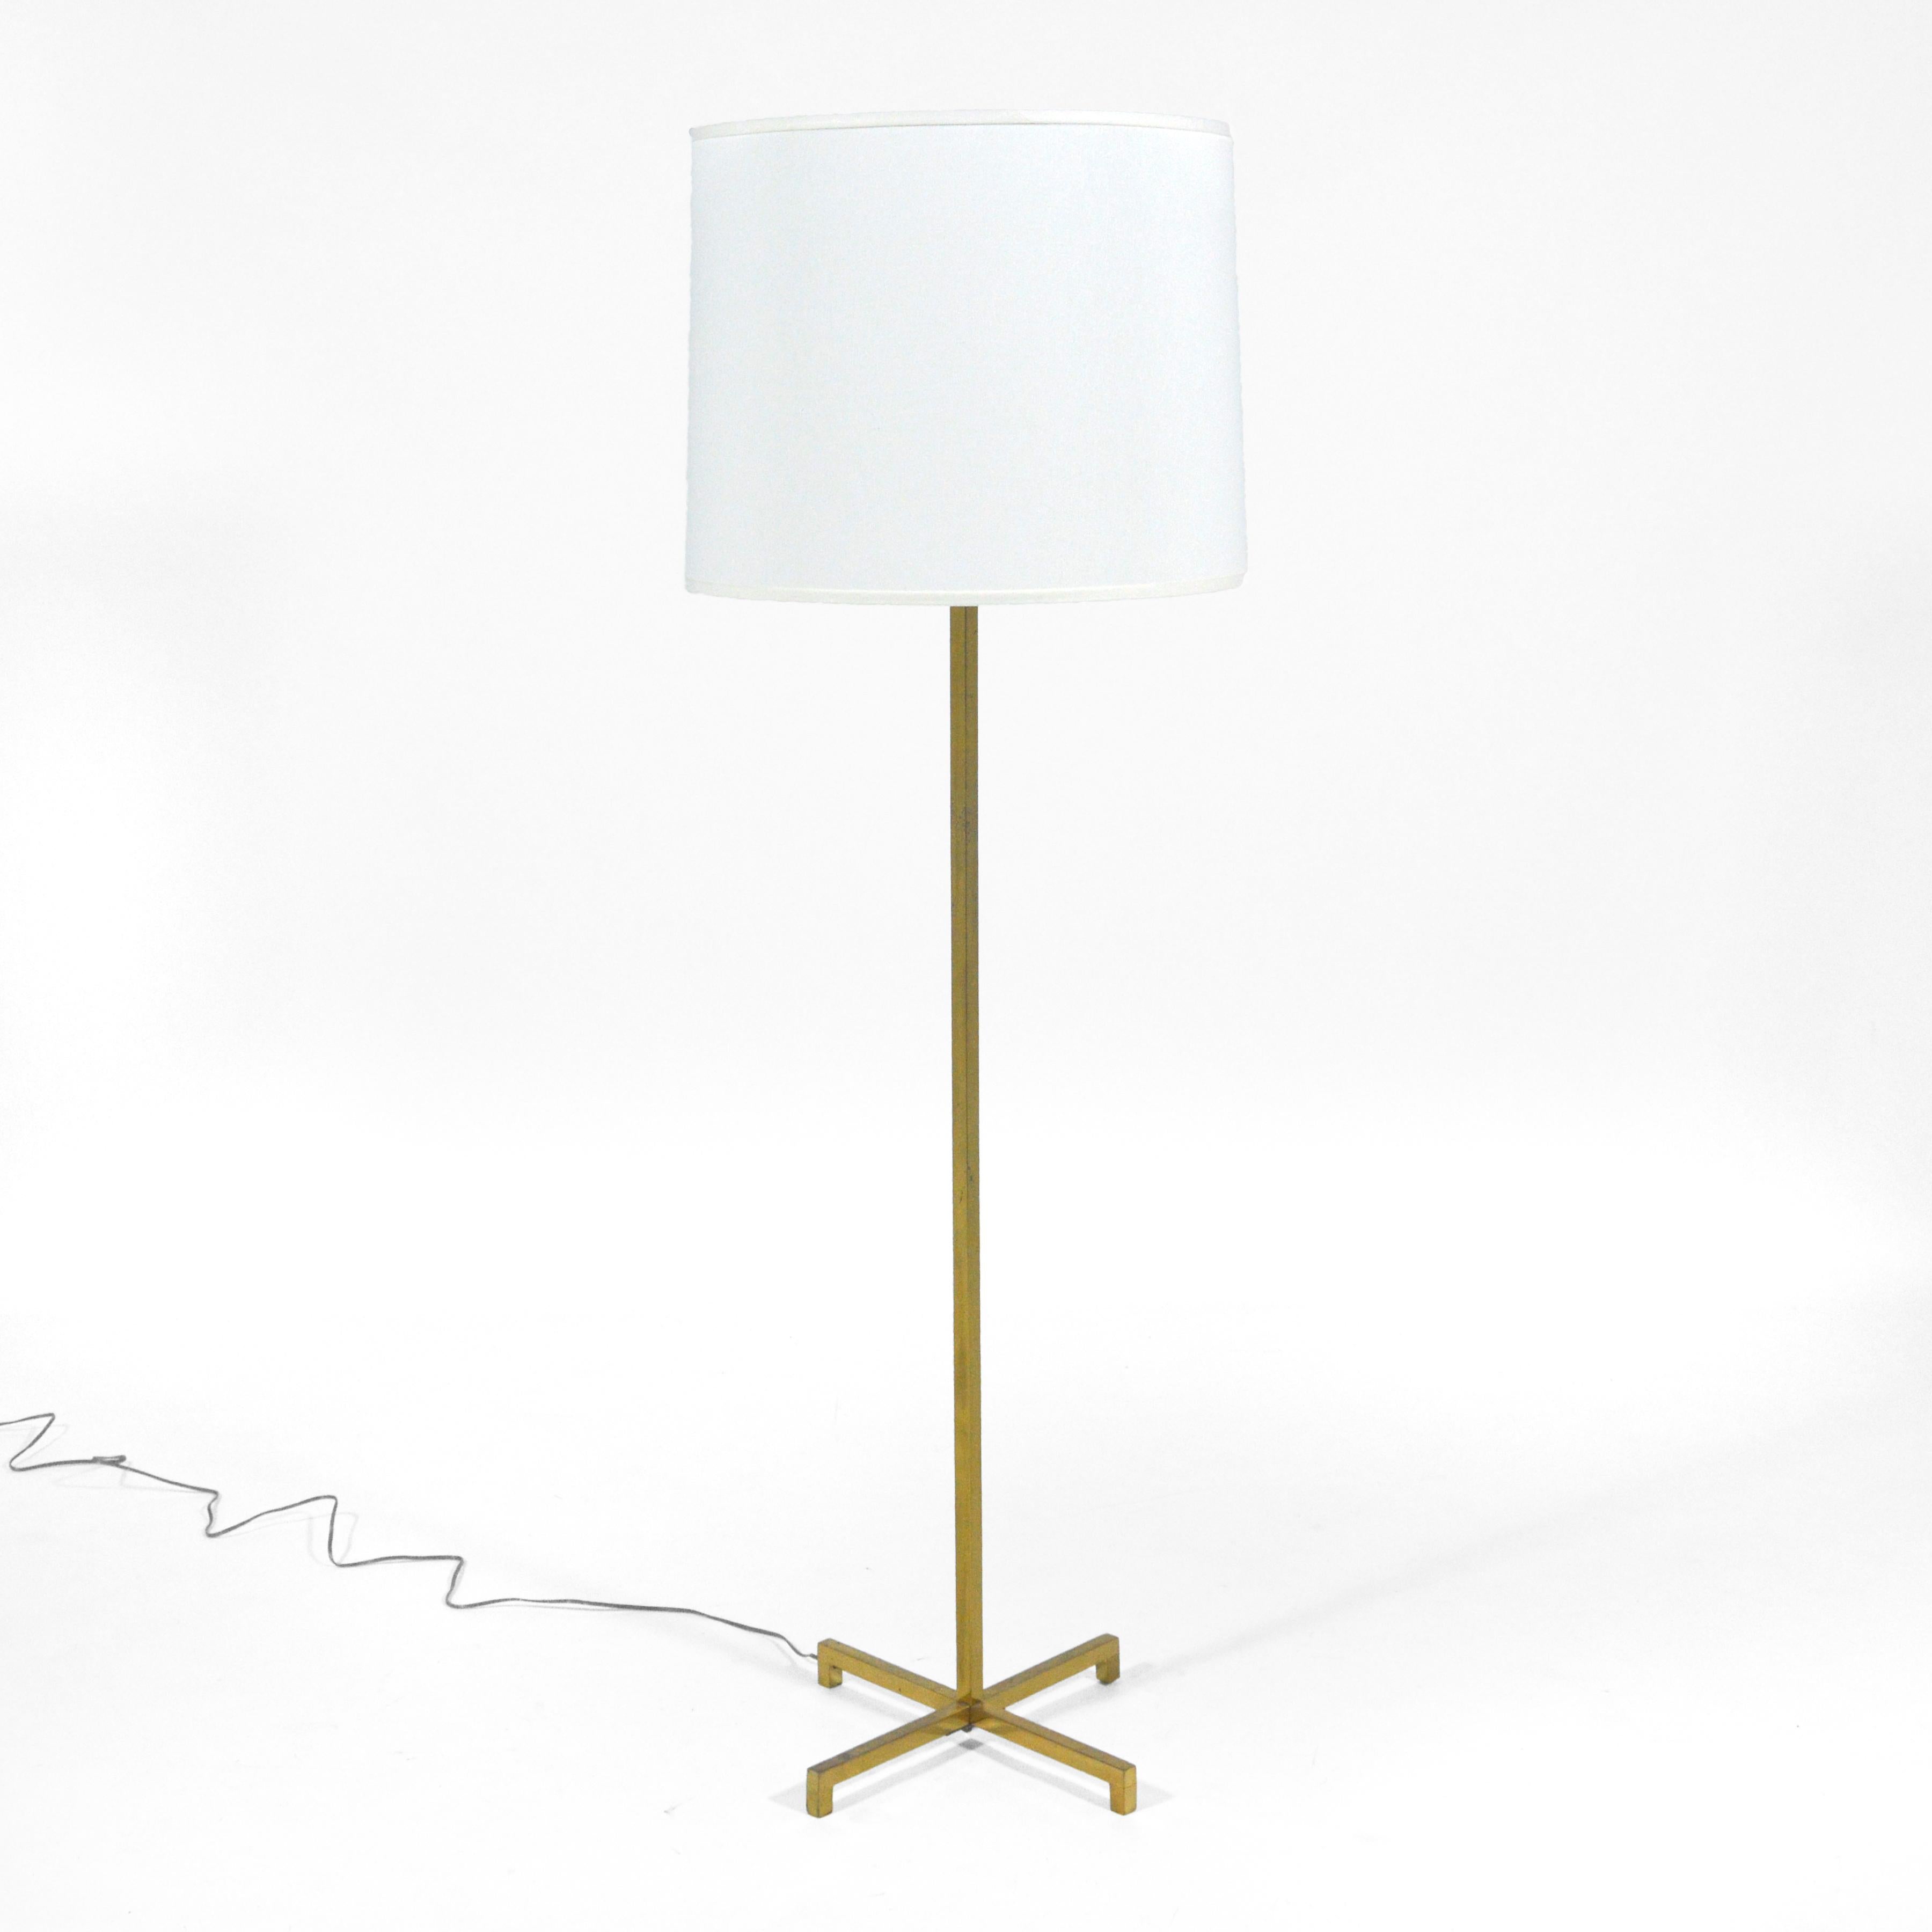 This beautiful brass floor lamp designed by T.H. Robsjohn-Gibbings for Hansen is classic Gibbings– understated, refined, exquisitely detailed and timeless. The cruciform base supports the square central column which has an adjustable three-bulb head